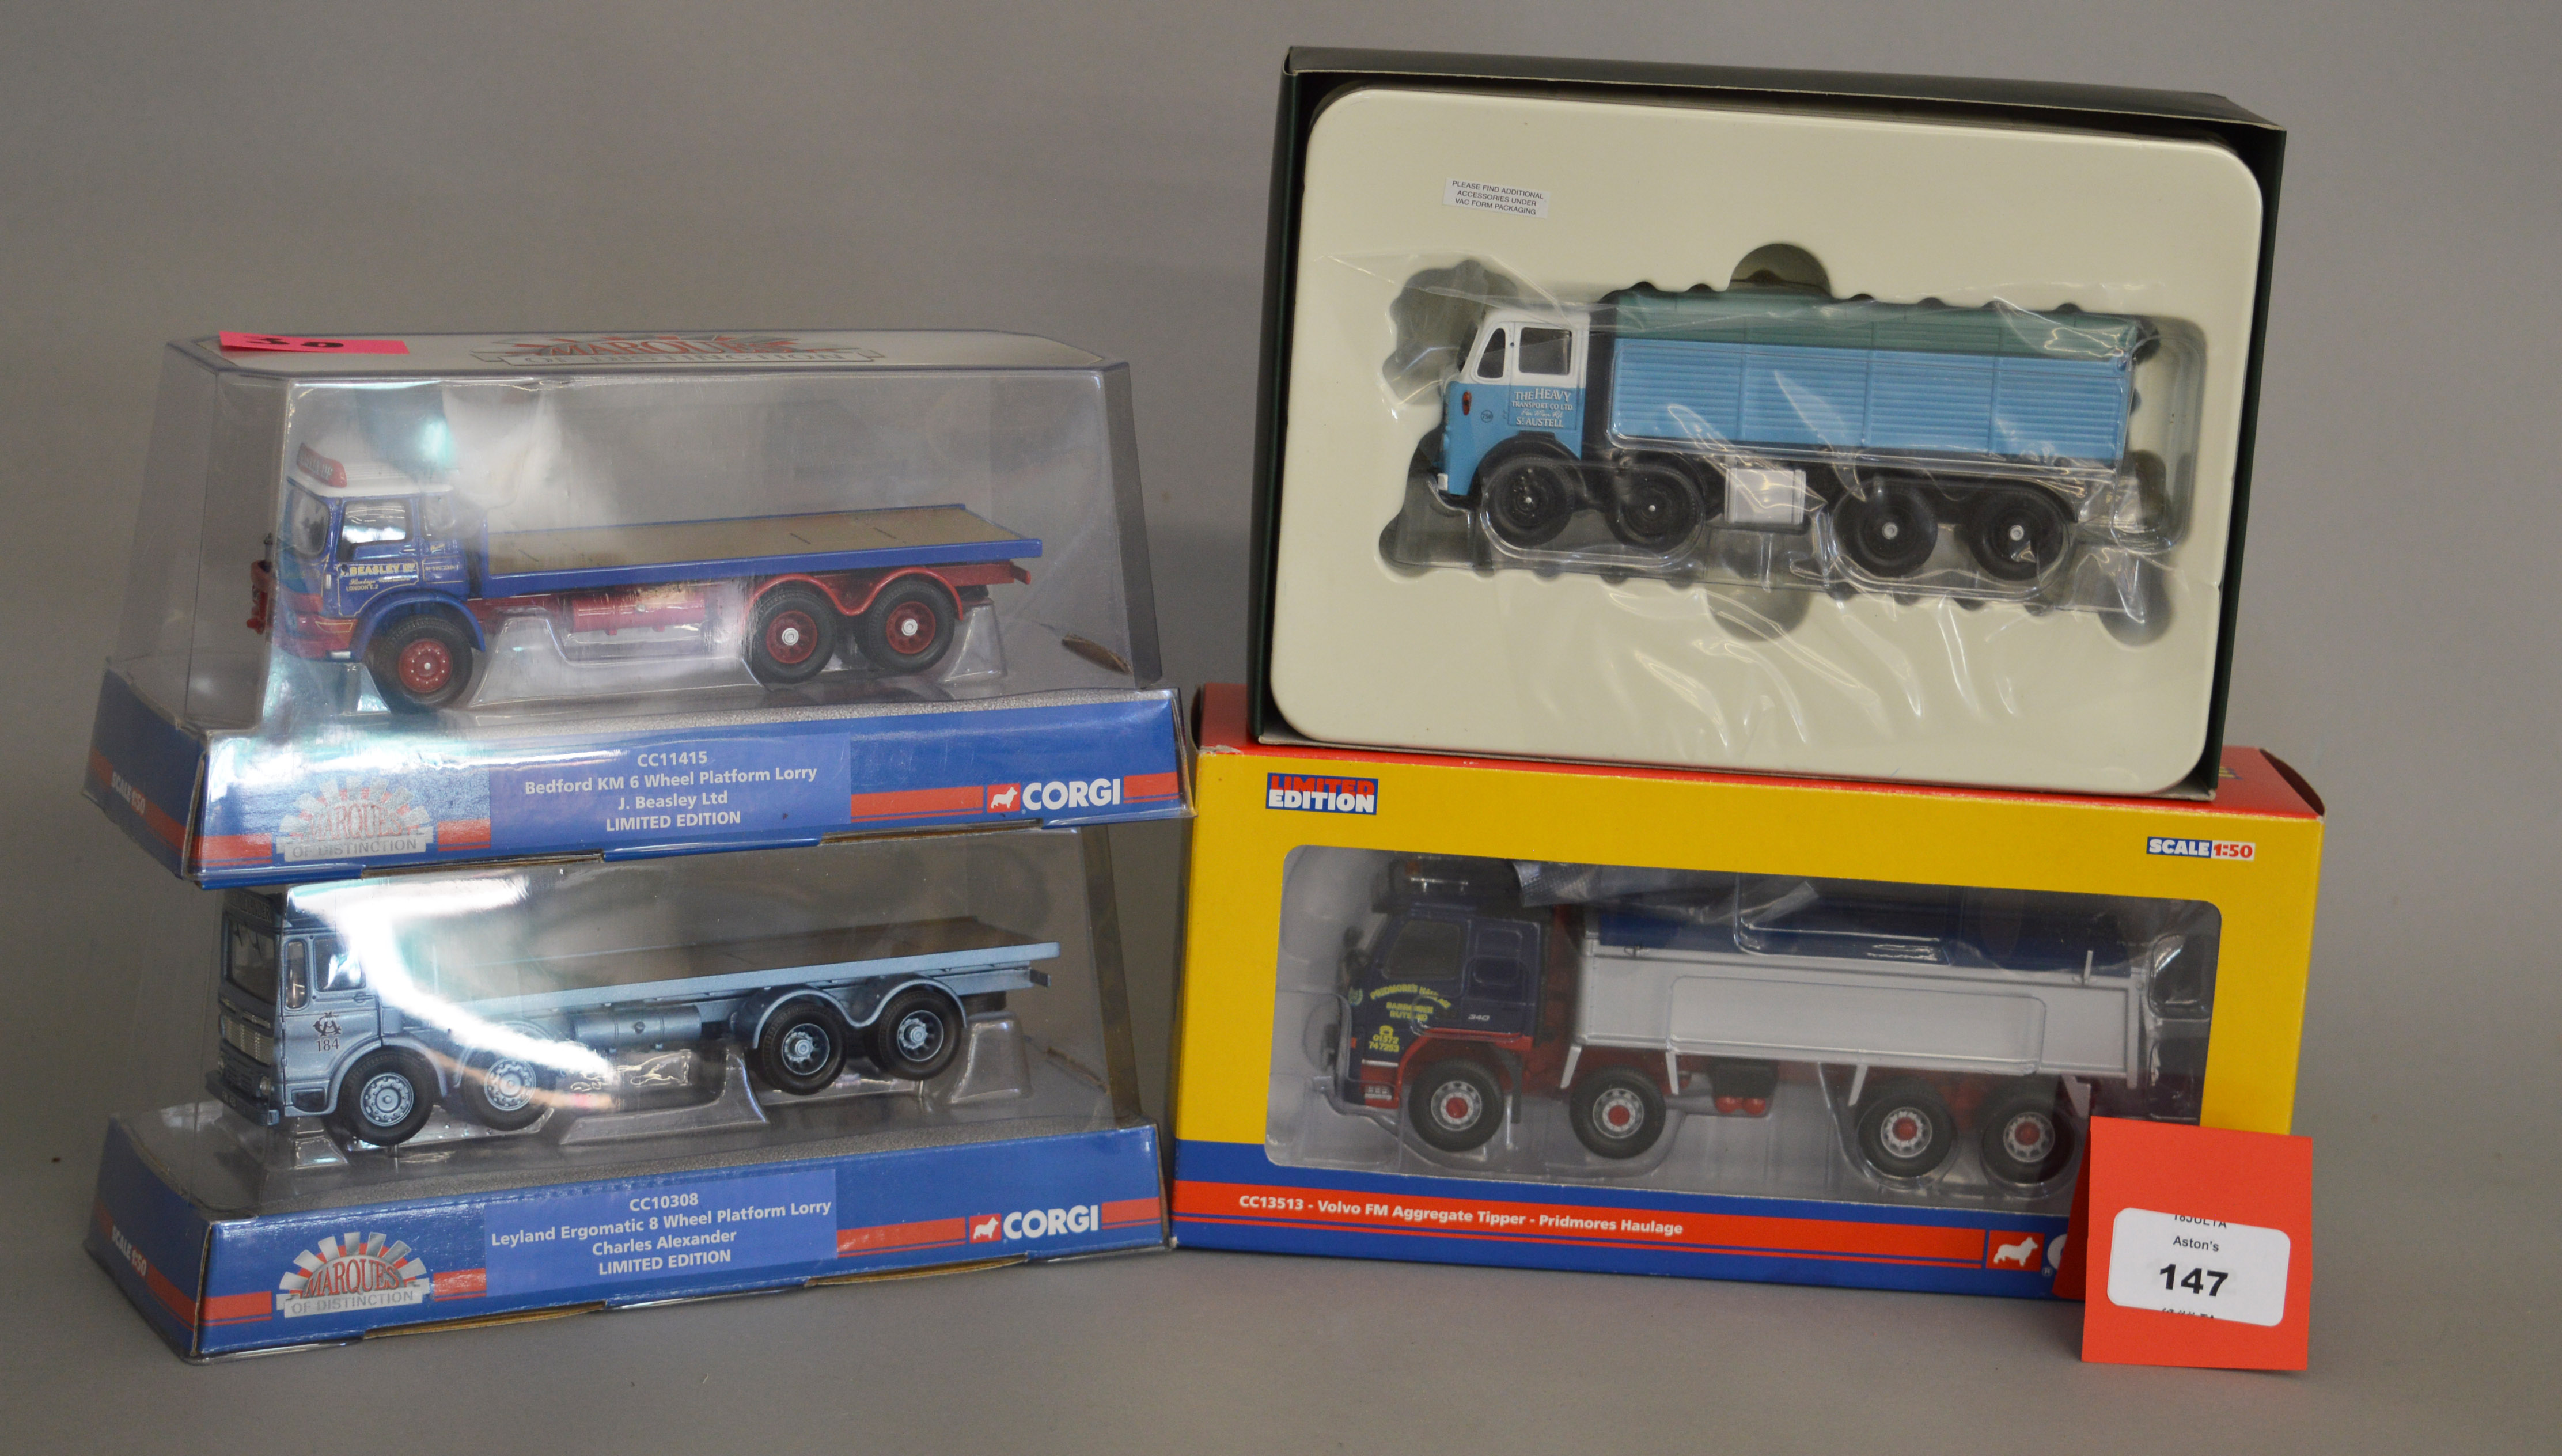 Four Corgi 1:50 scale diecast model Tippers and Marques of Distinction: CC10602 Premium Edition